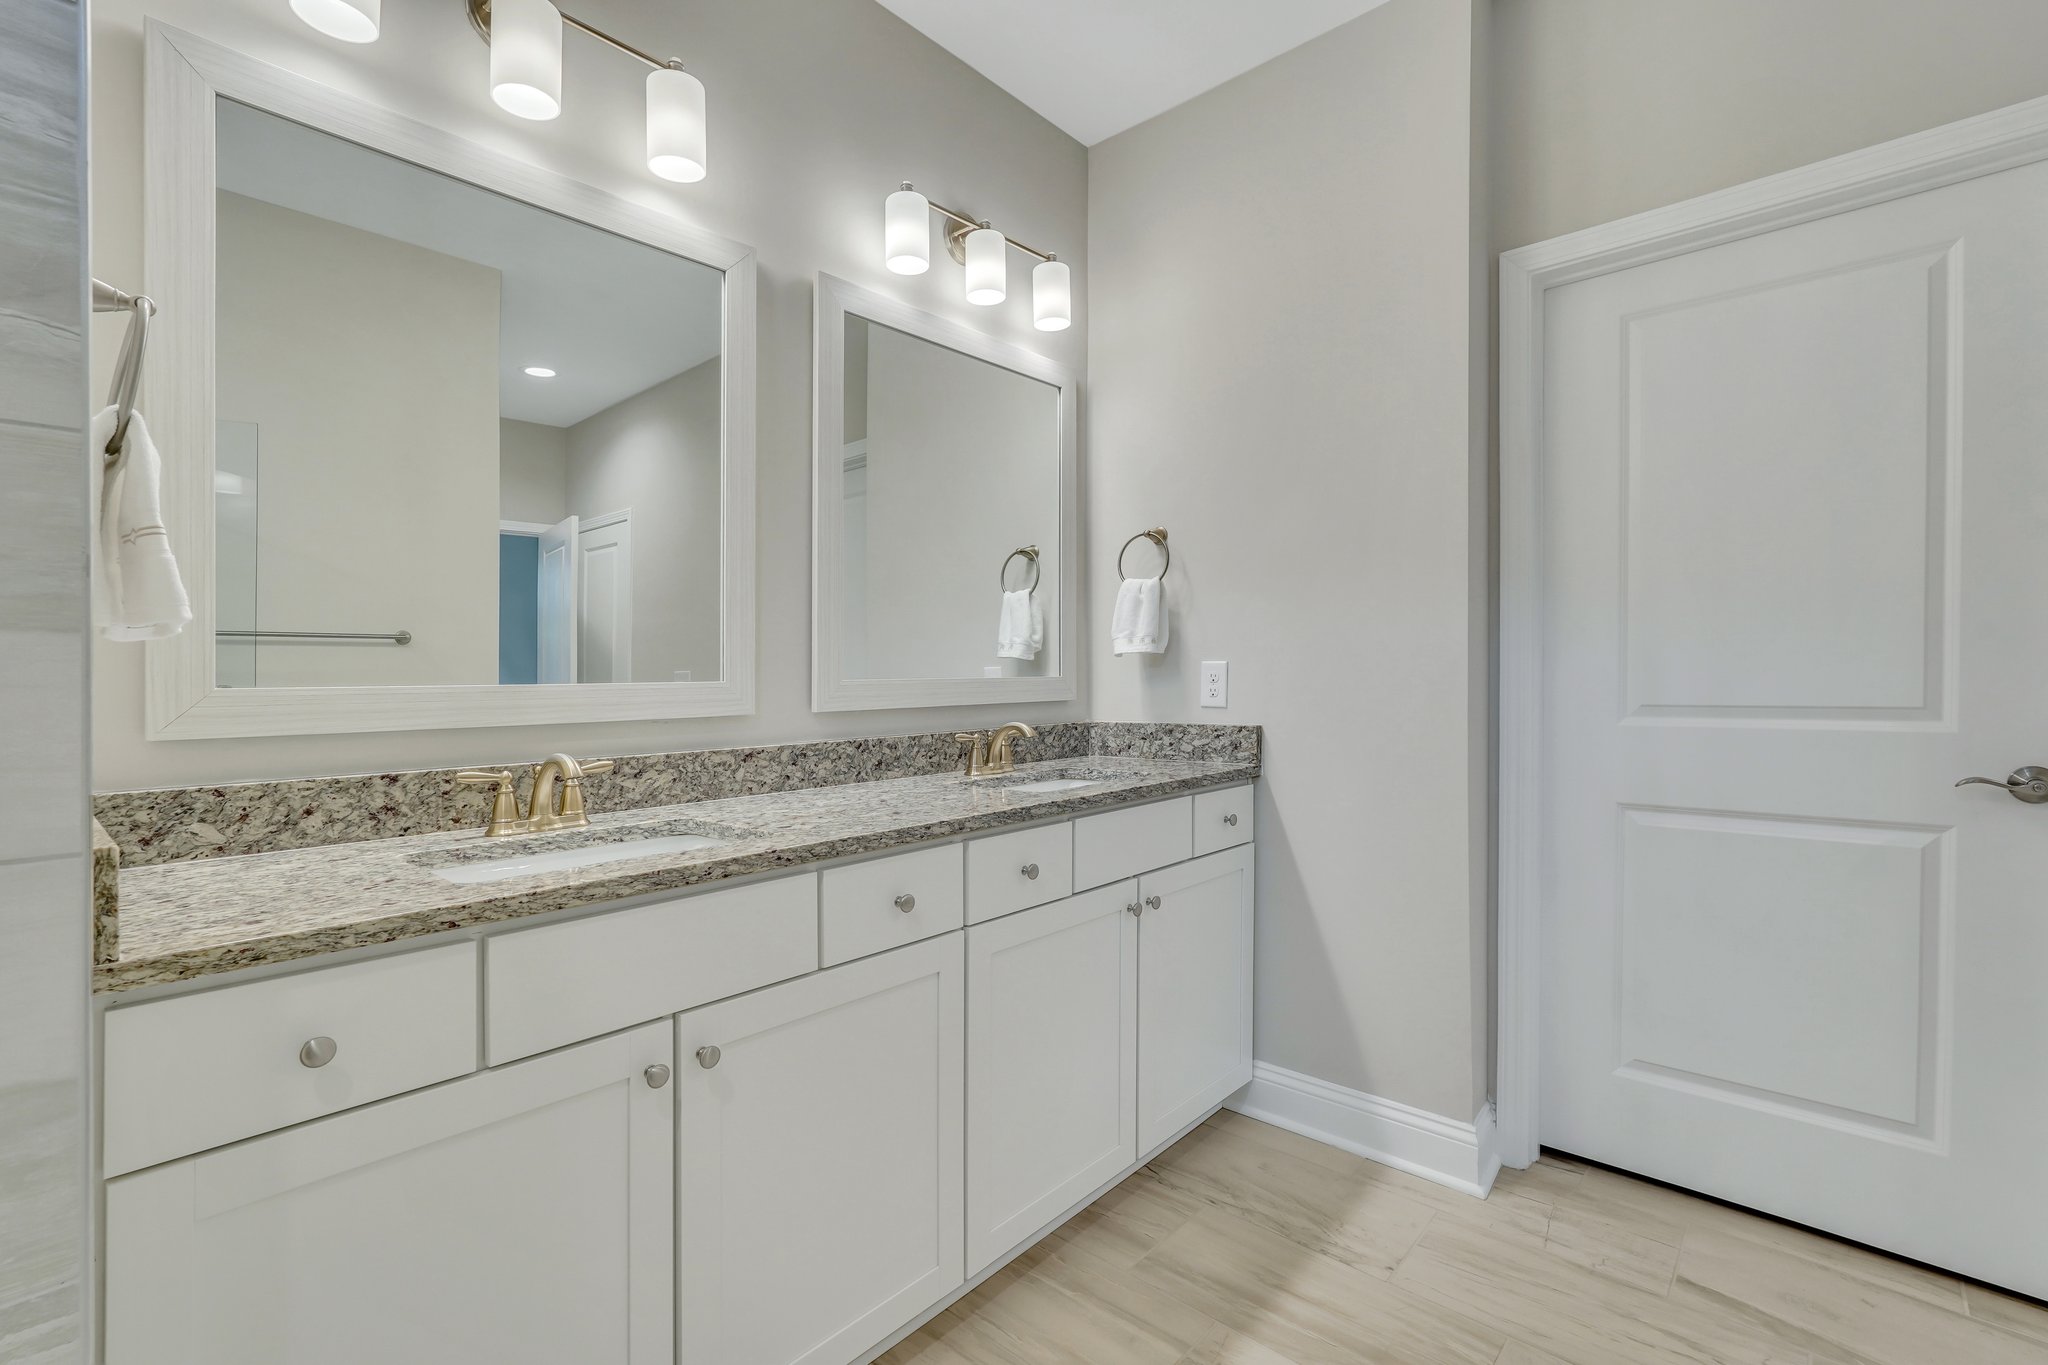 Dual Vanities and Private Water Closet